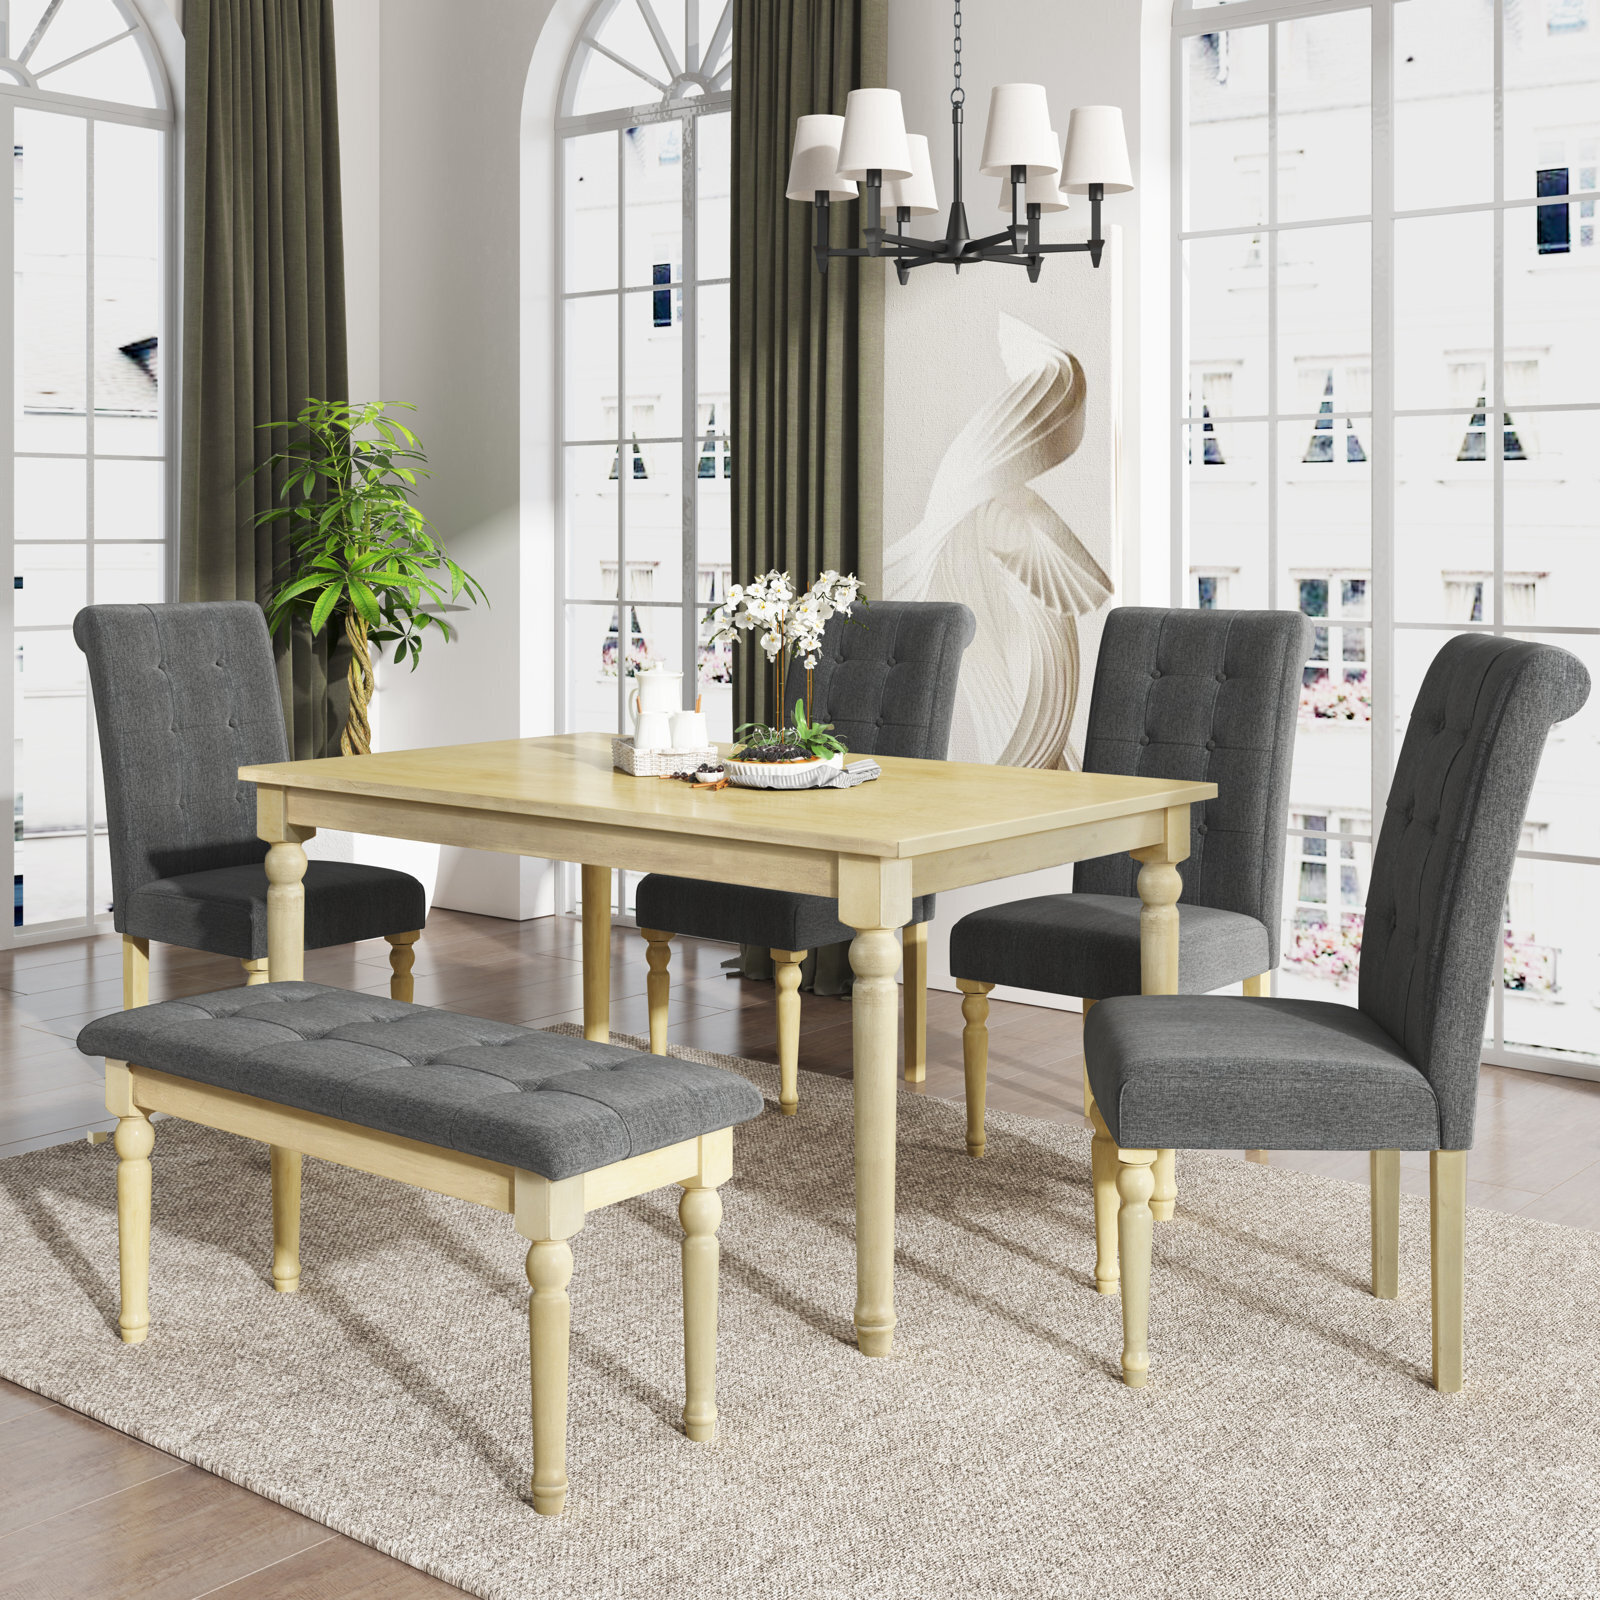 Elegant Dining Table with Bench and Chairs